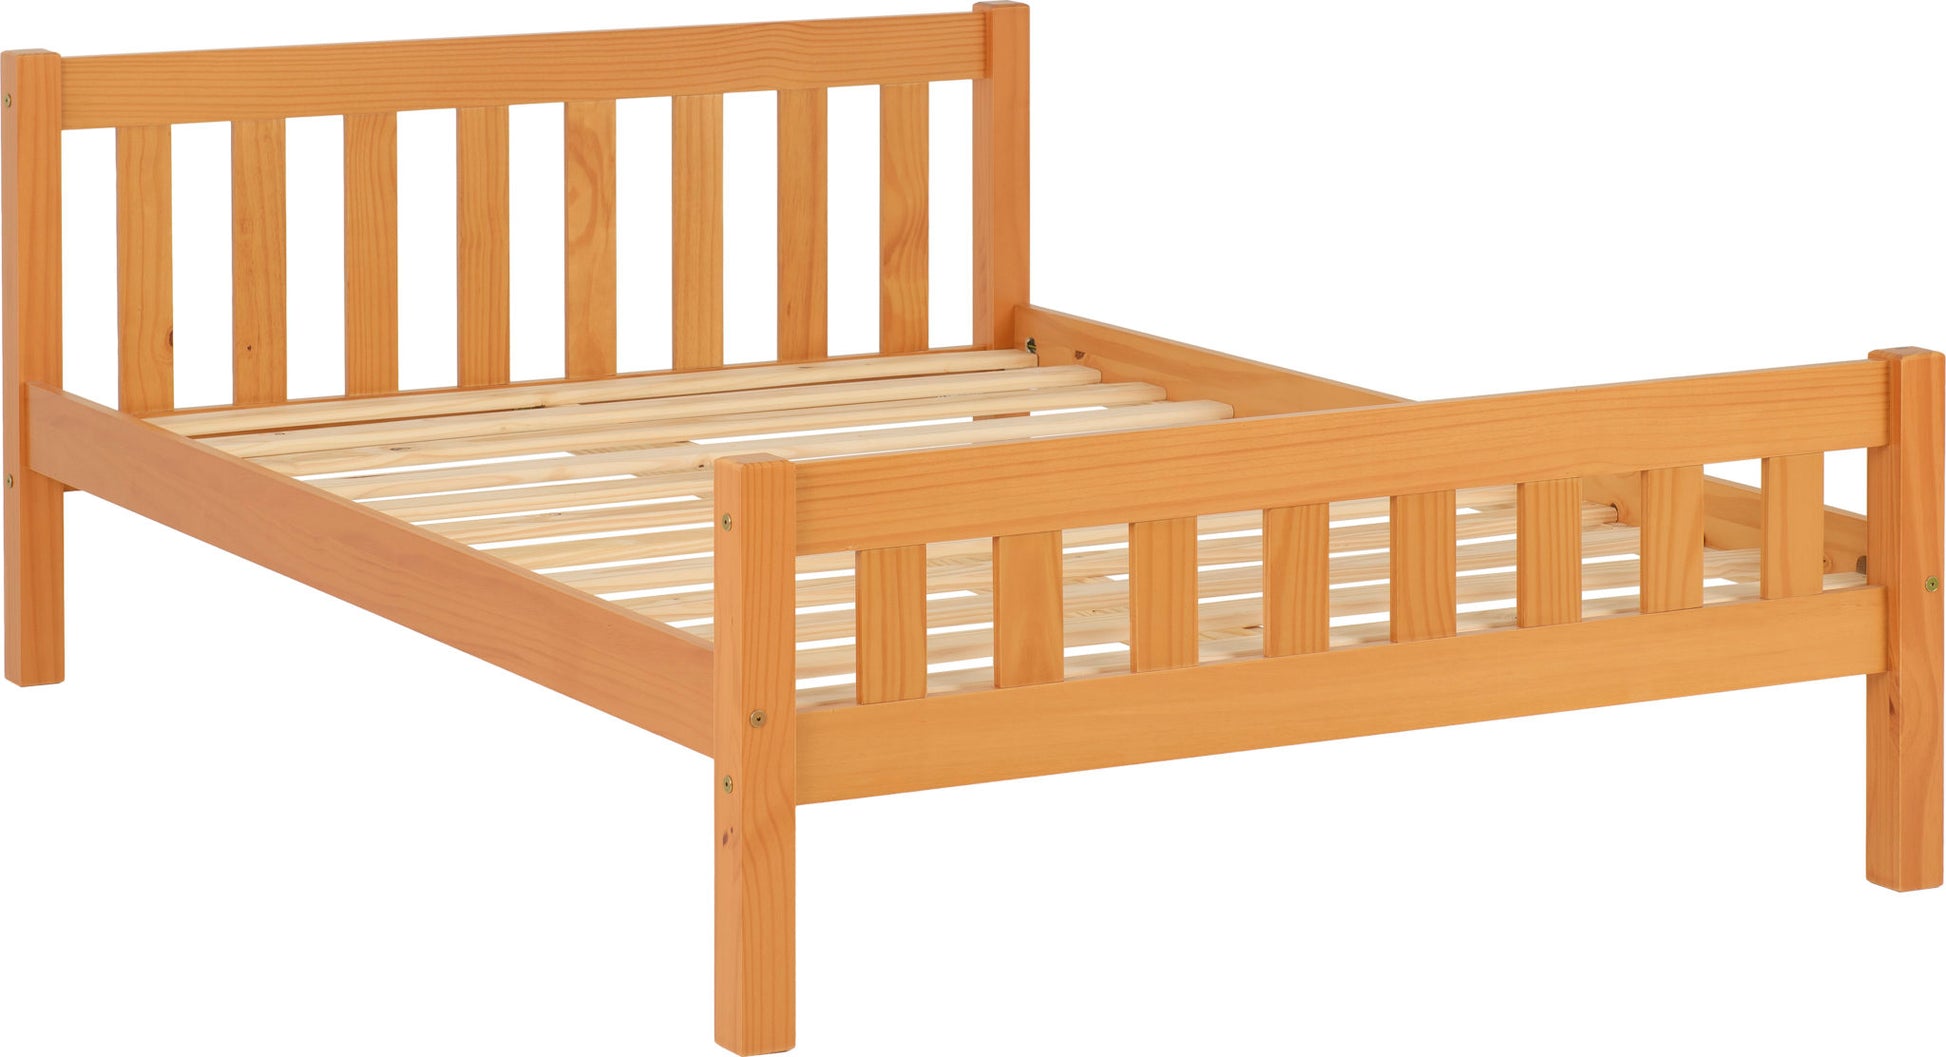 Carlow 4'6" Double Bed - Antique Pine